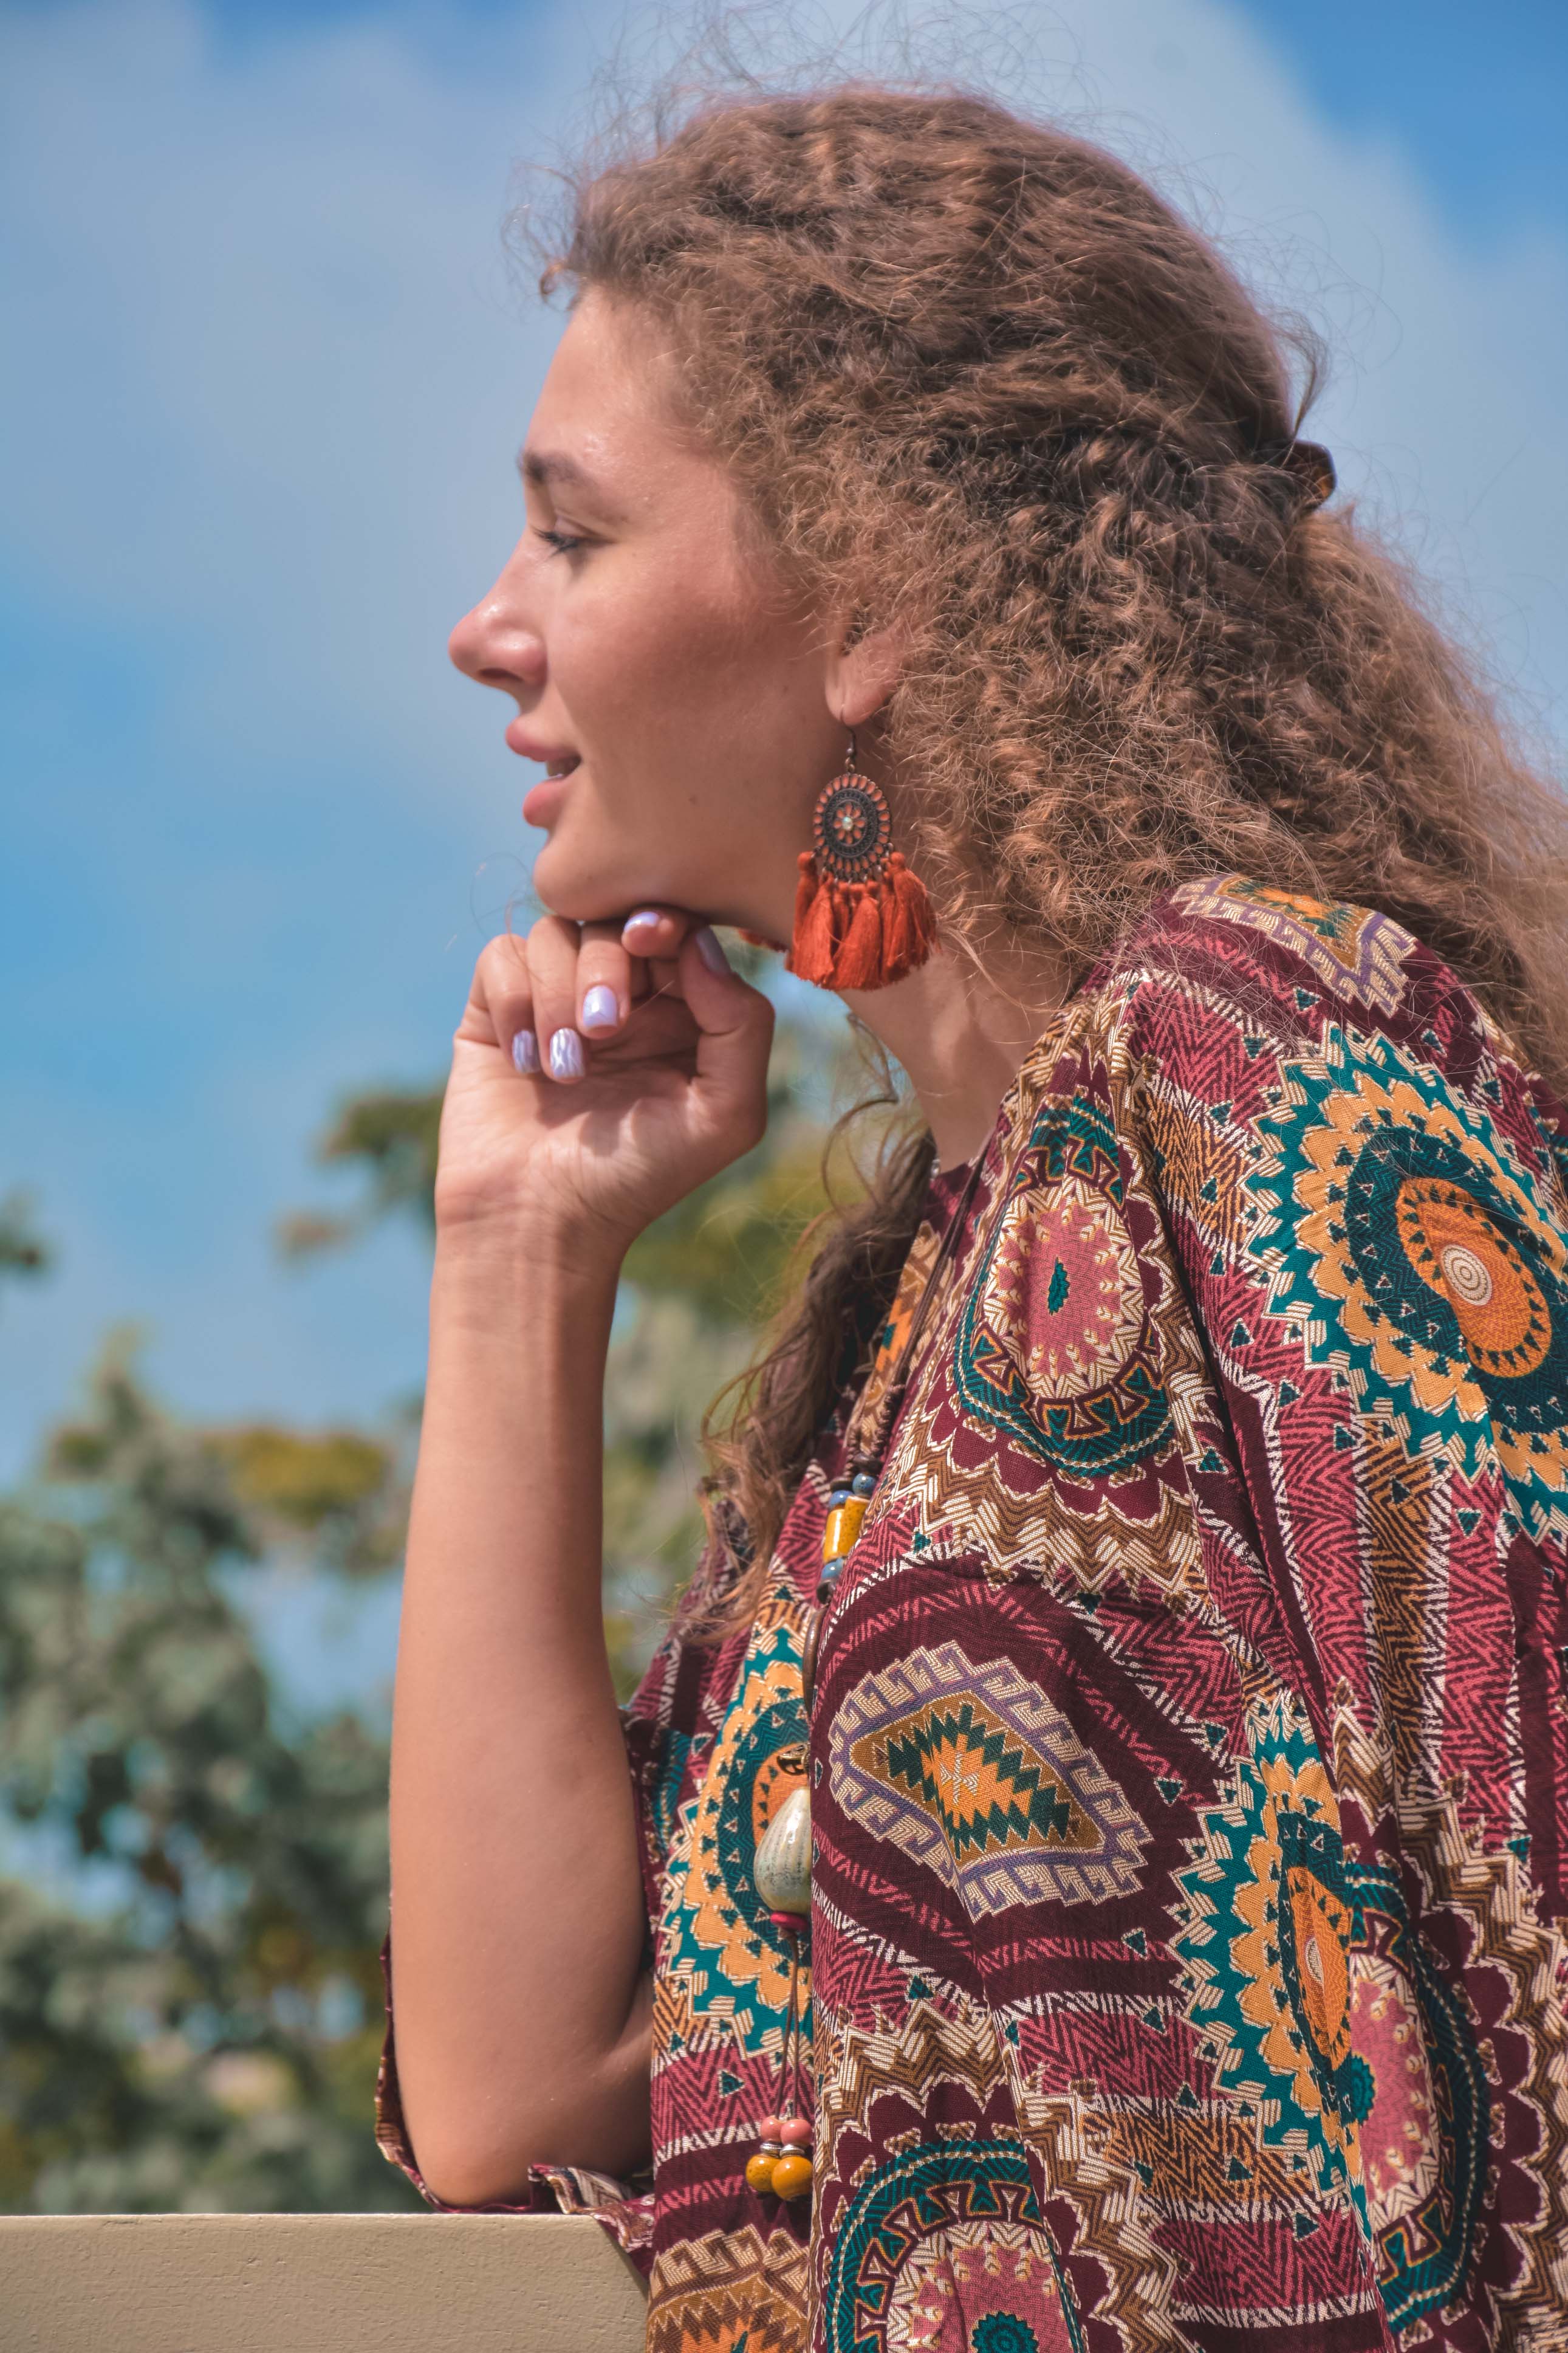 AGRABAH EARRINGS Elepanta Earrings - Buy Today Elephant Pants Jewelry And Bohemian Clothes Handmade In Thailand Help To Save The Elephants FairTrade And Vegan